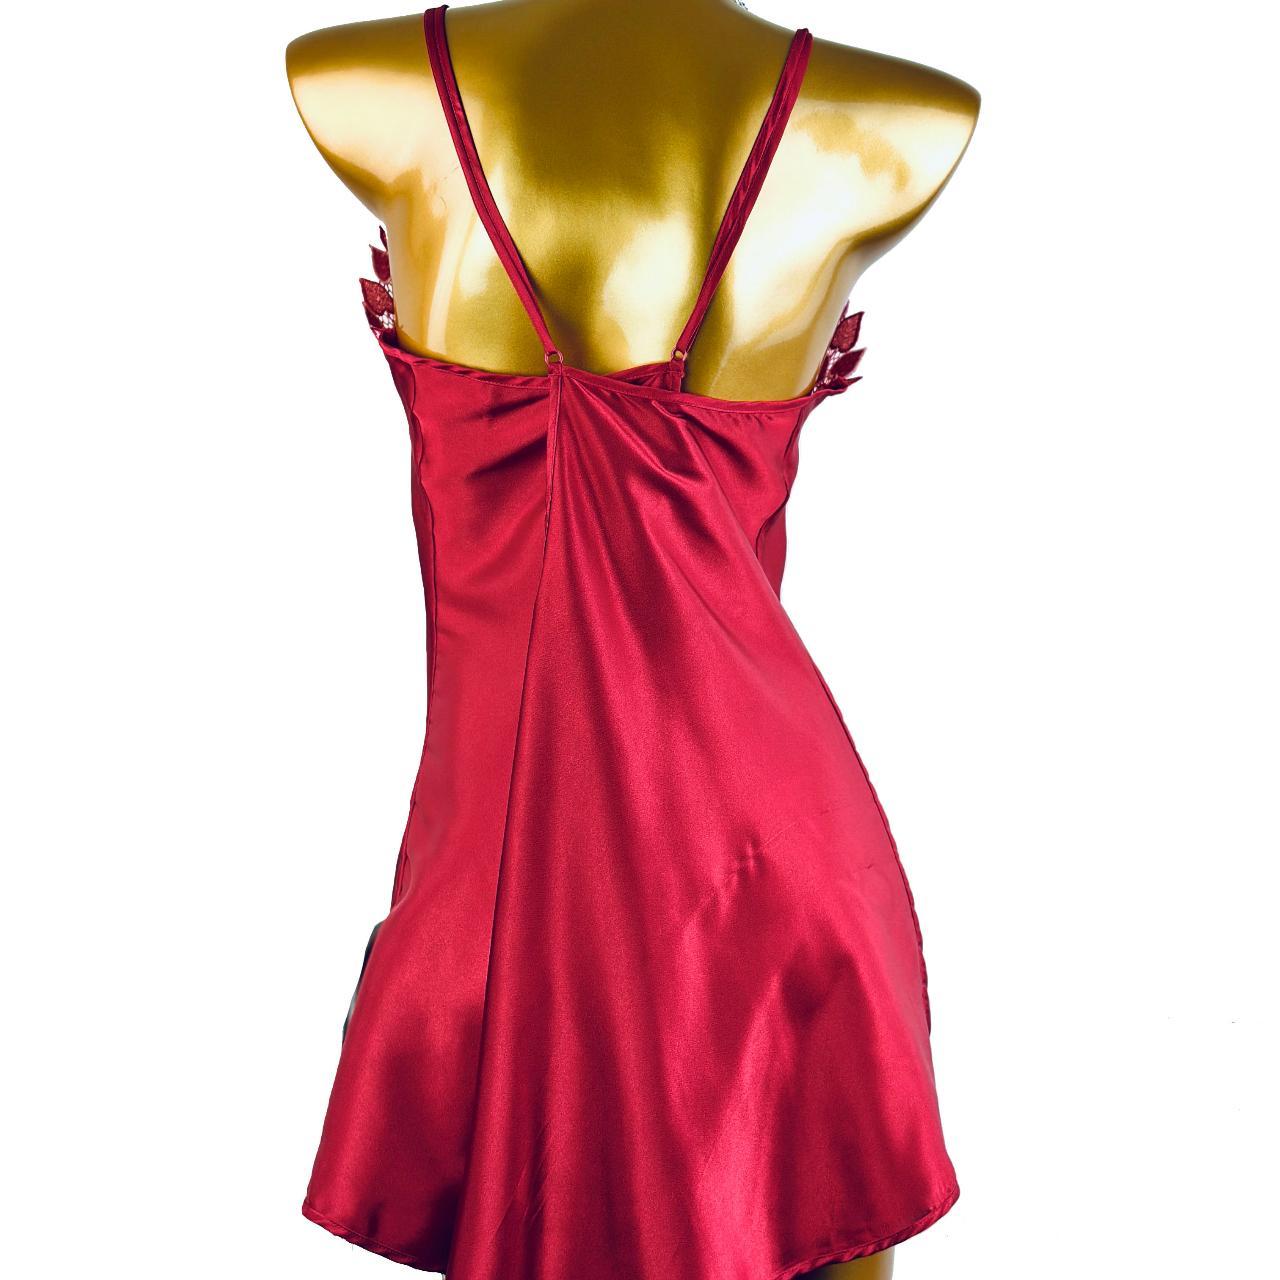 Frederick's of Hollywood Women's Red and White Dress (4)